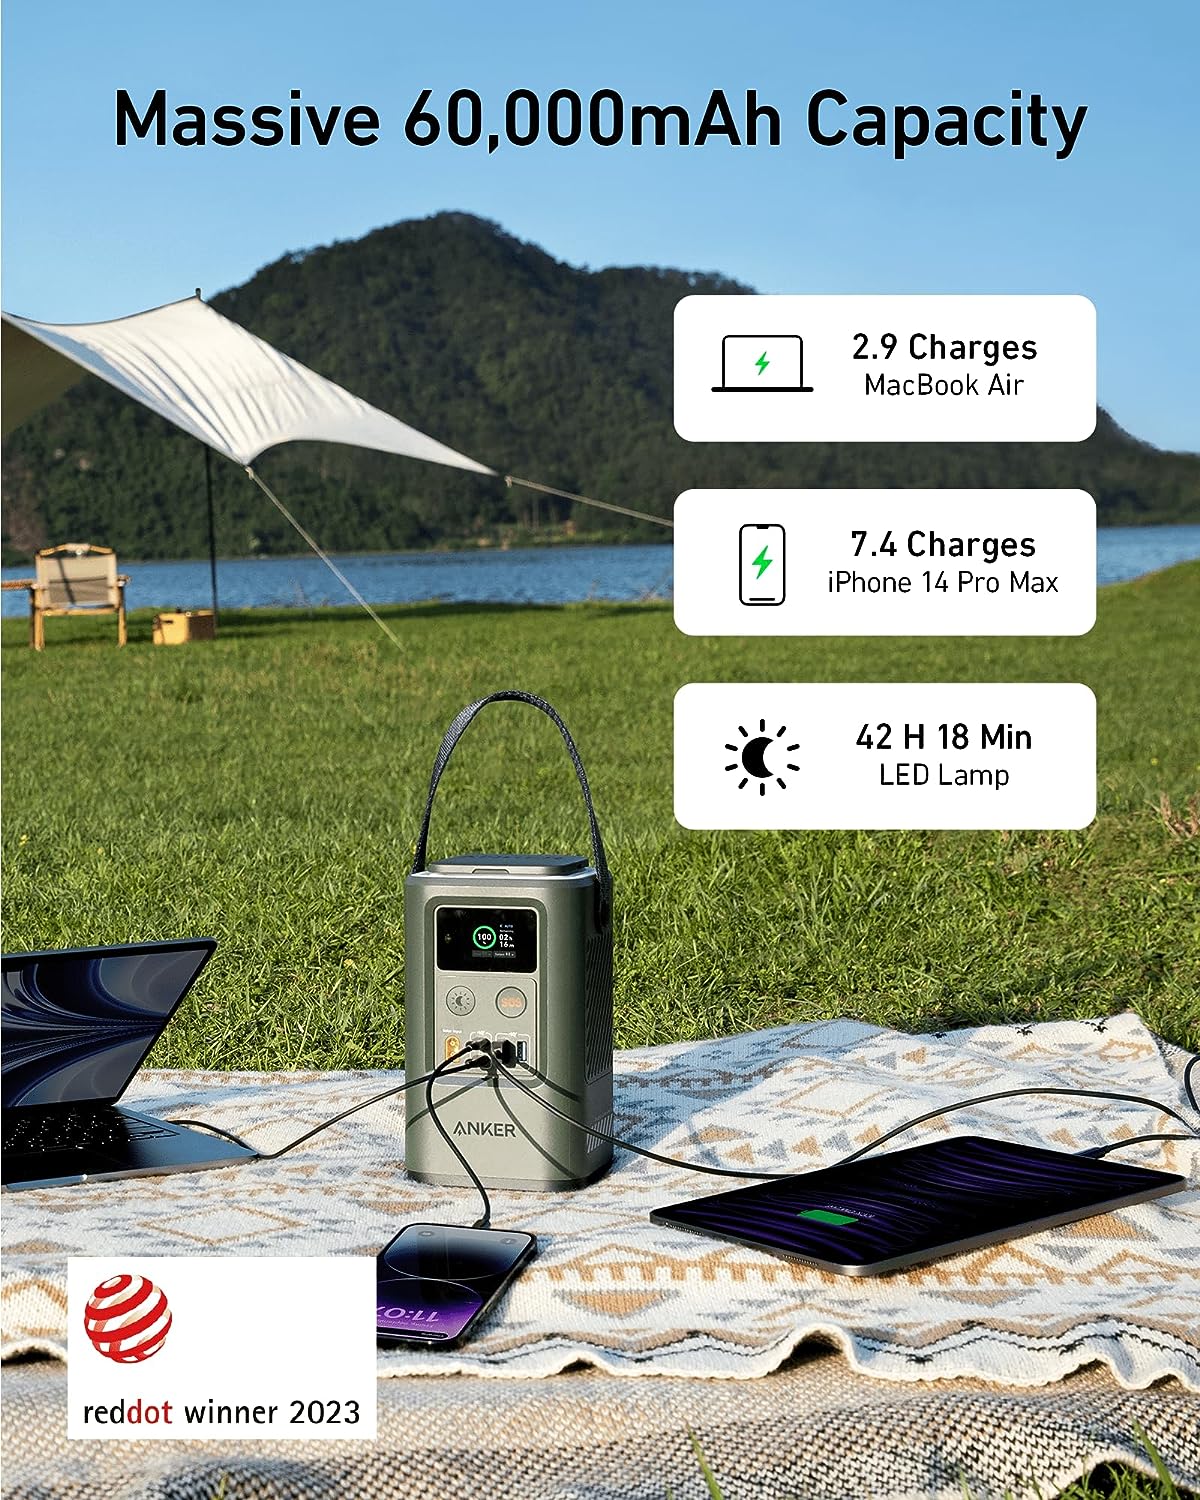 Anker Power Bank, 60,000mAh Portable Charger 60W with Smart Digital Display